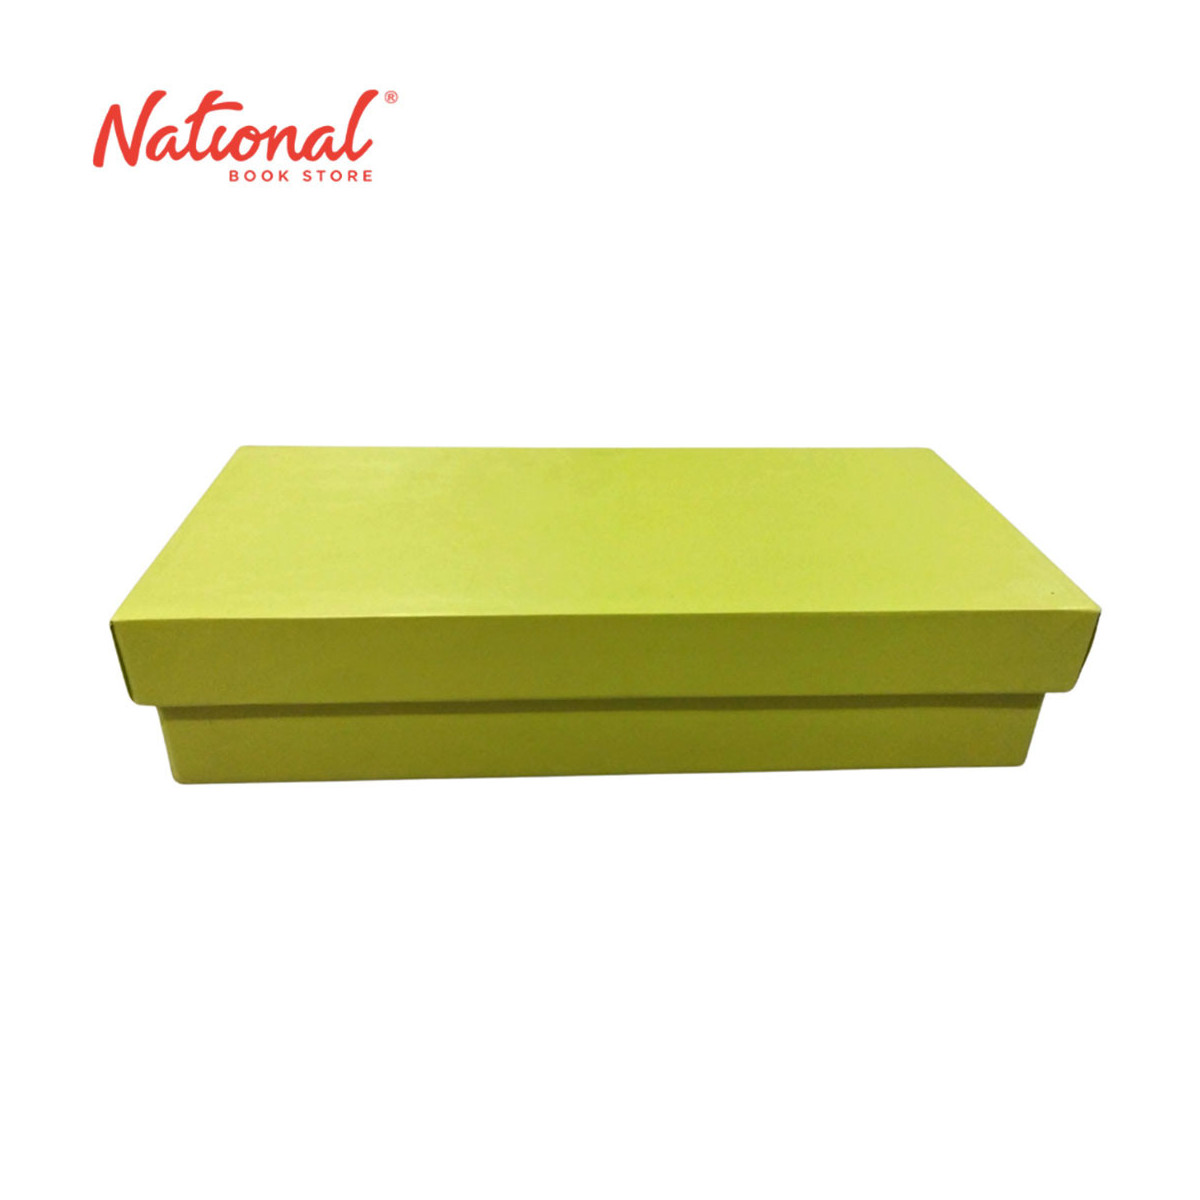 Plain Color Gift Box Rectangular Large 24.5x11x4cm - Giftwrapping Supplies